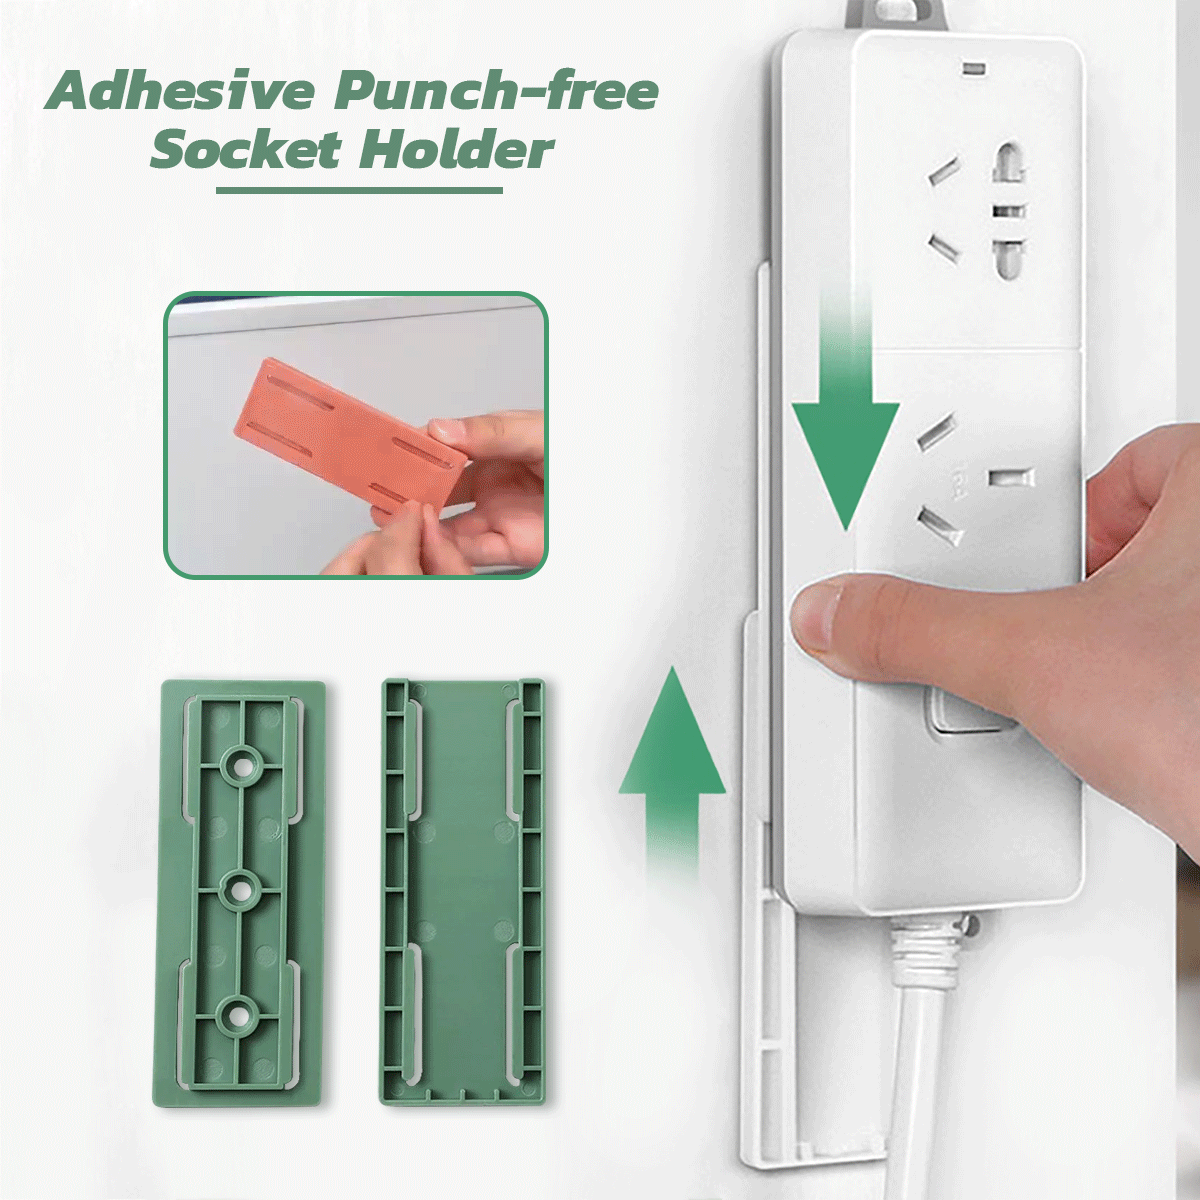 THIS IS A DISCOUNT FOR YOU - Adhesive Punch-free Socket Holder